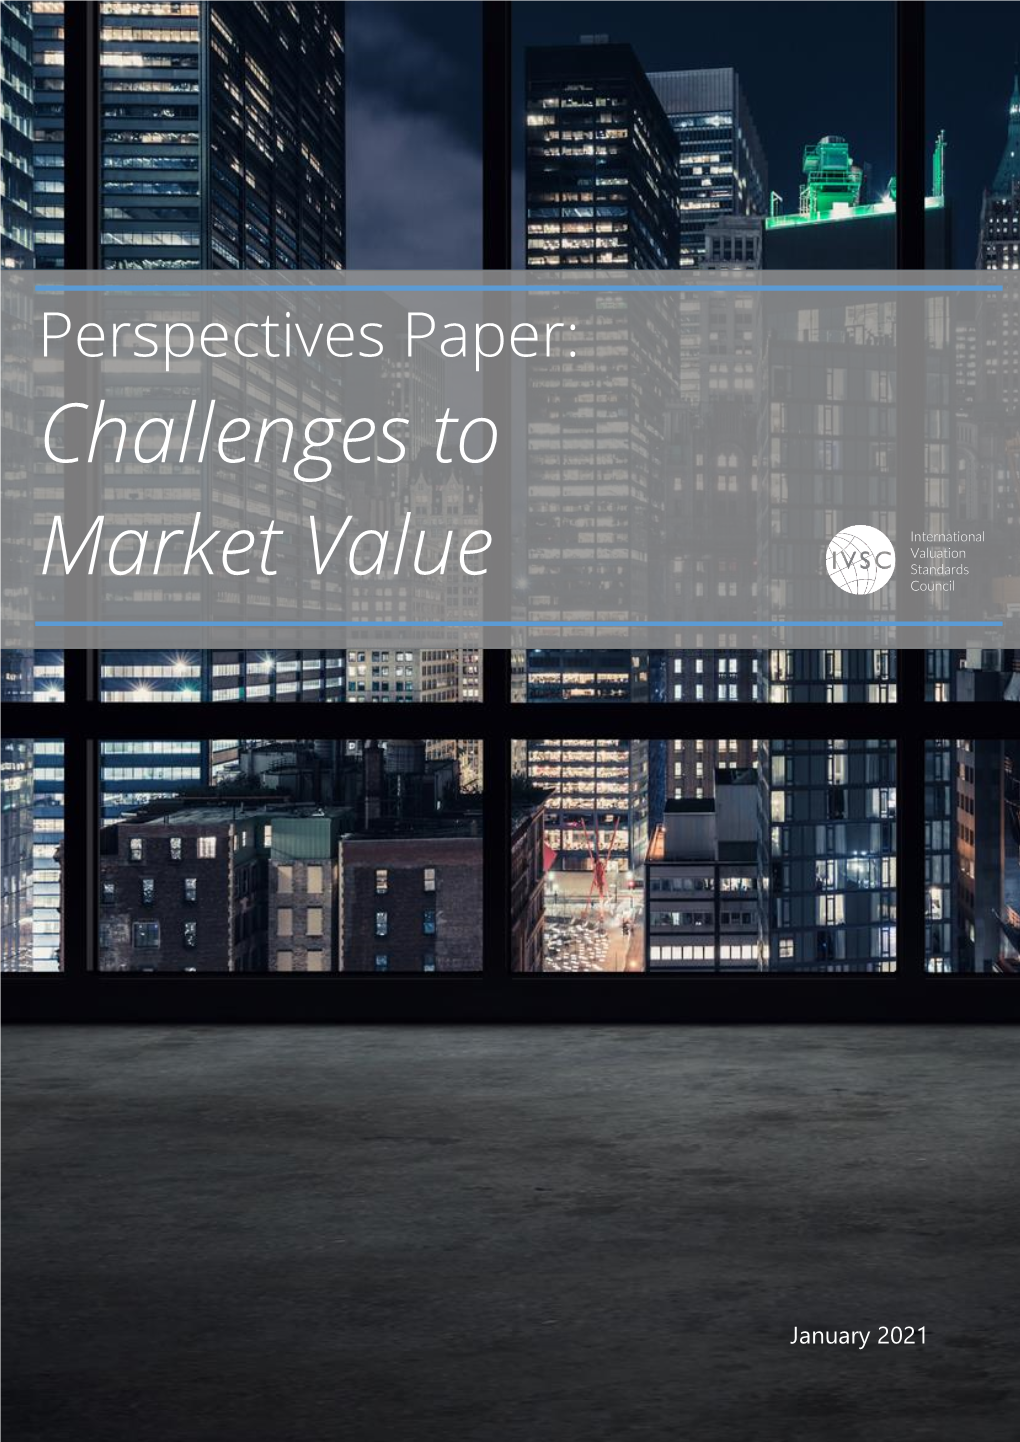 Perspectives Paper: Challenges to Market Value